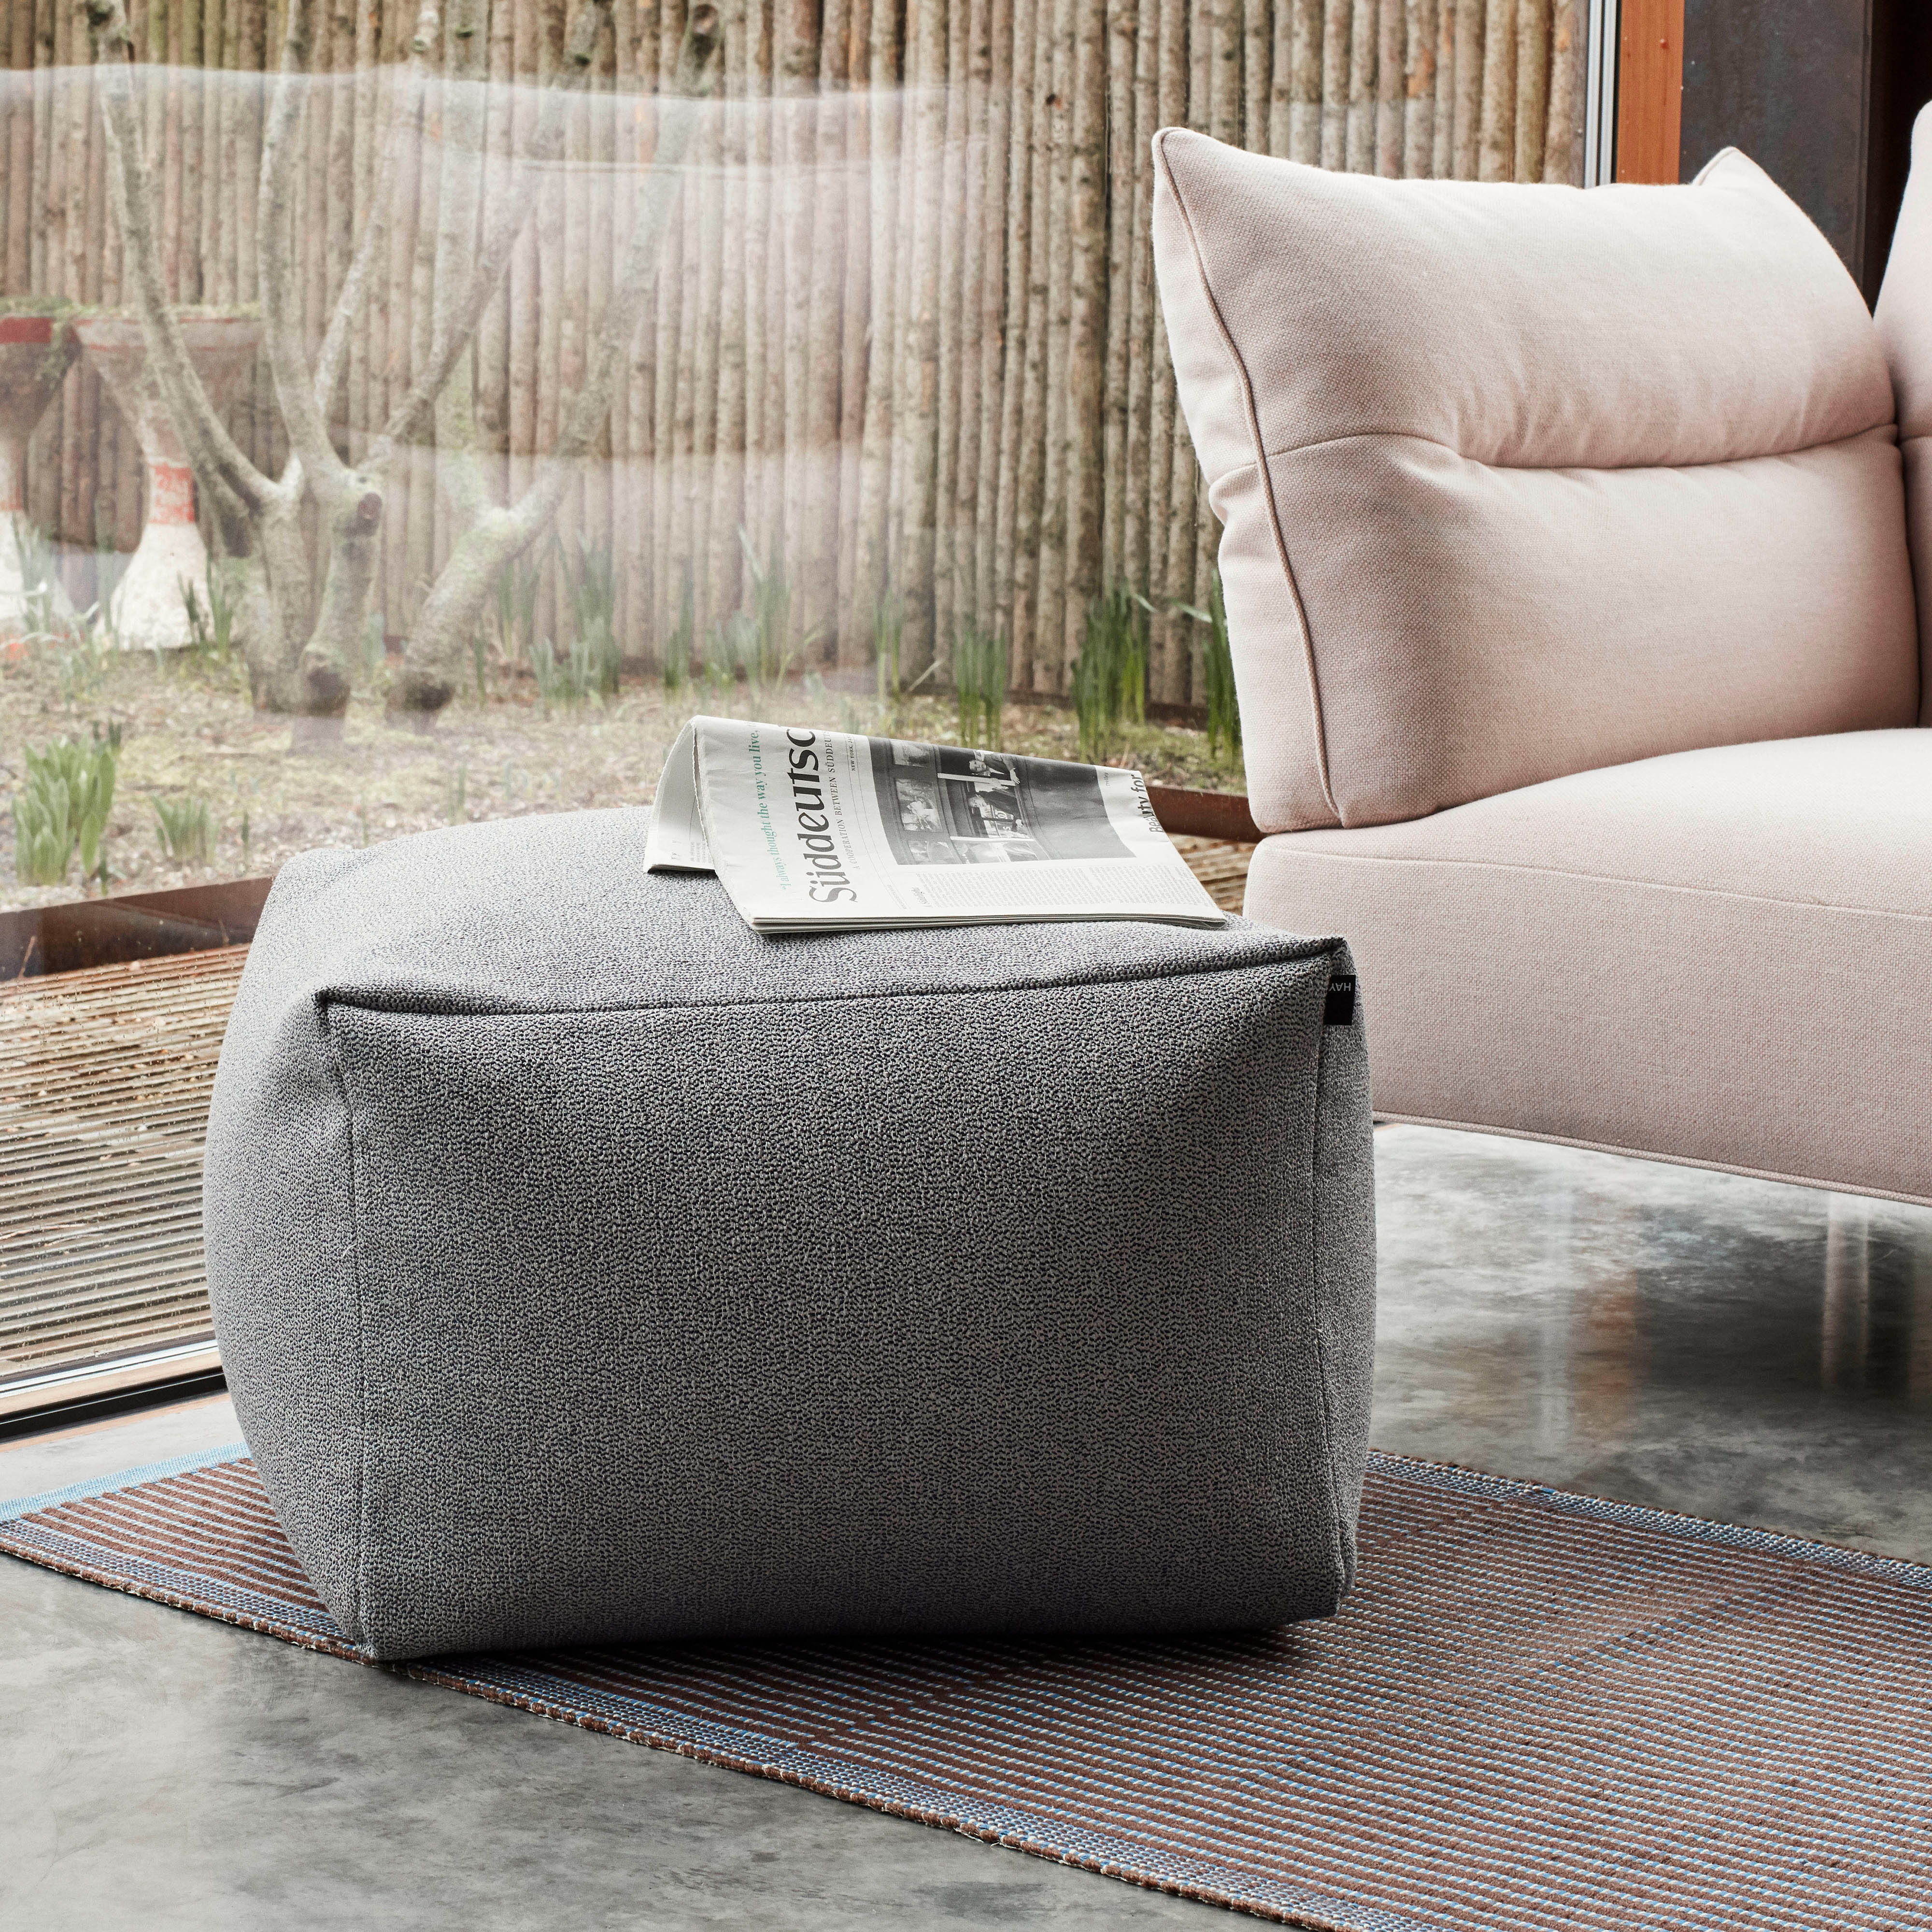 Pouf sit pouf sprinkle 59x59 cm from HAY - NordicNest.com